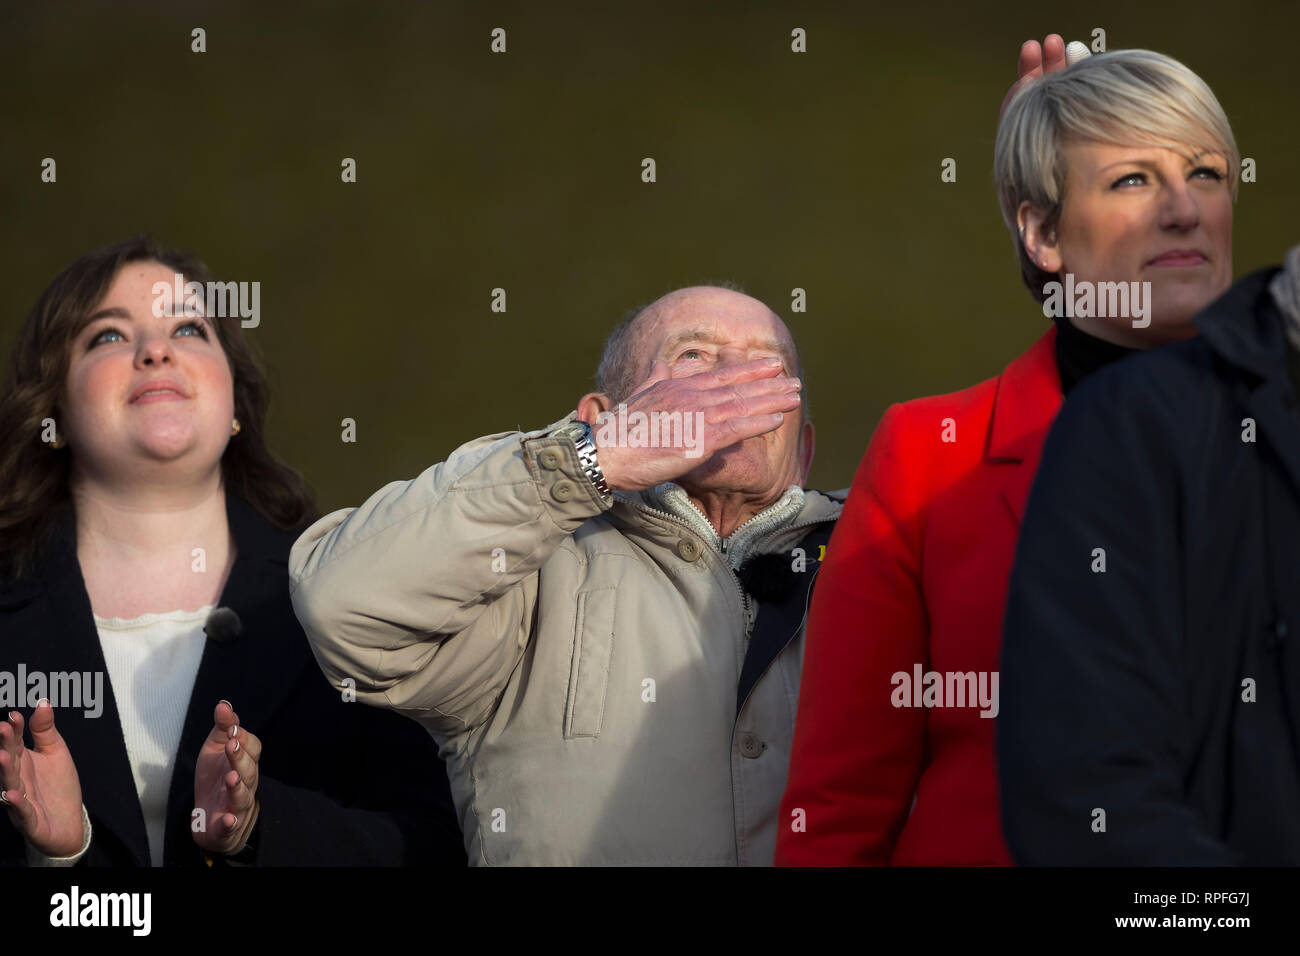 Sheffield, South Yorkshire, UK. 22nd Feb, 2019. Tony Foulds waves and in tears during the Mi Amigo flypast at Endcliffe Park, Photograph by Credit: Richard Holmes/Alamy Live News Stock Photo